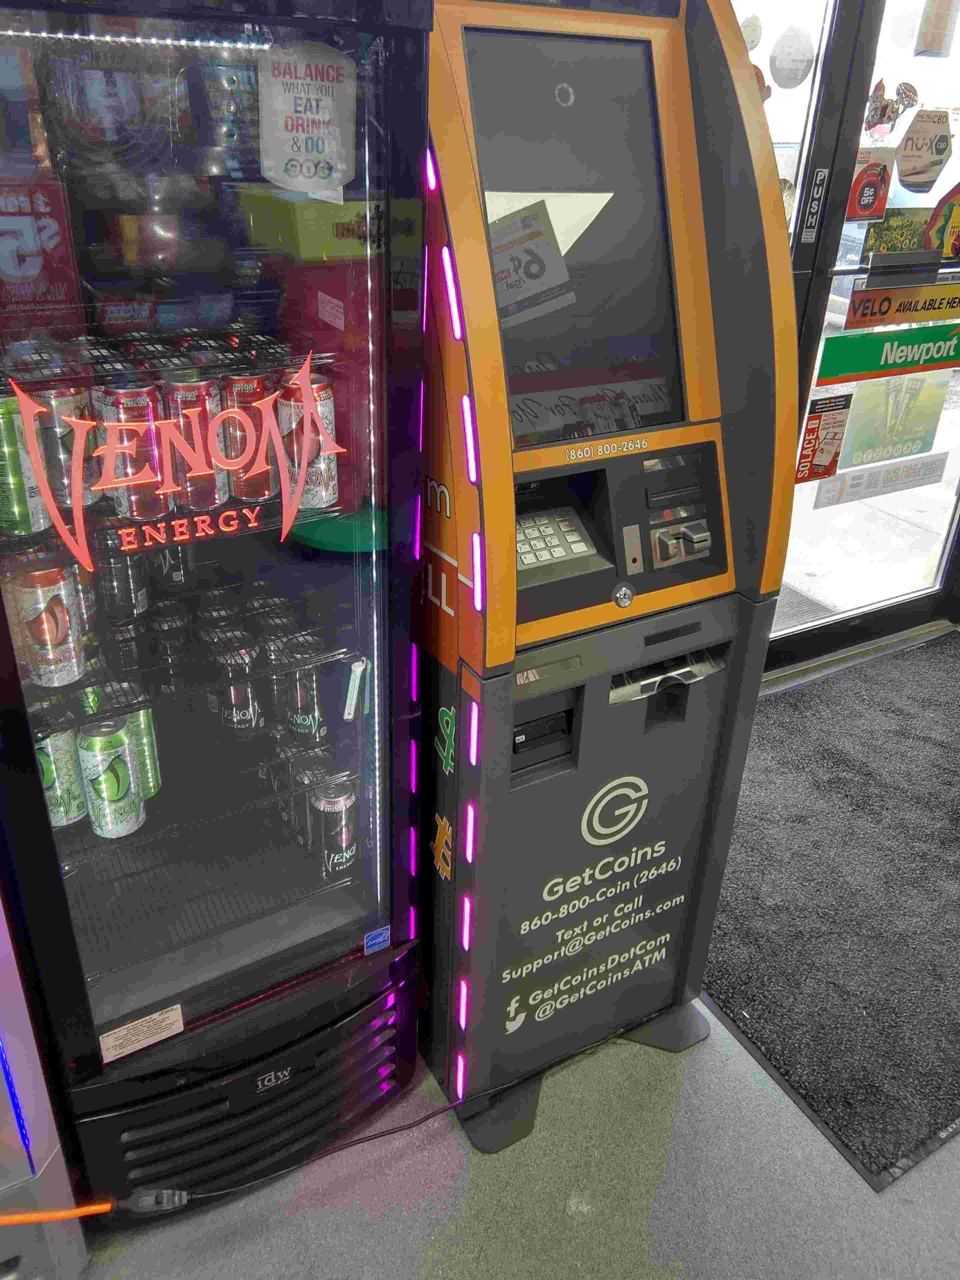 Getcoins - Bitcoin ATM - Inside of Mobil/One Stop Express in Kokomo, Indiana